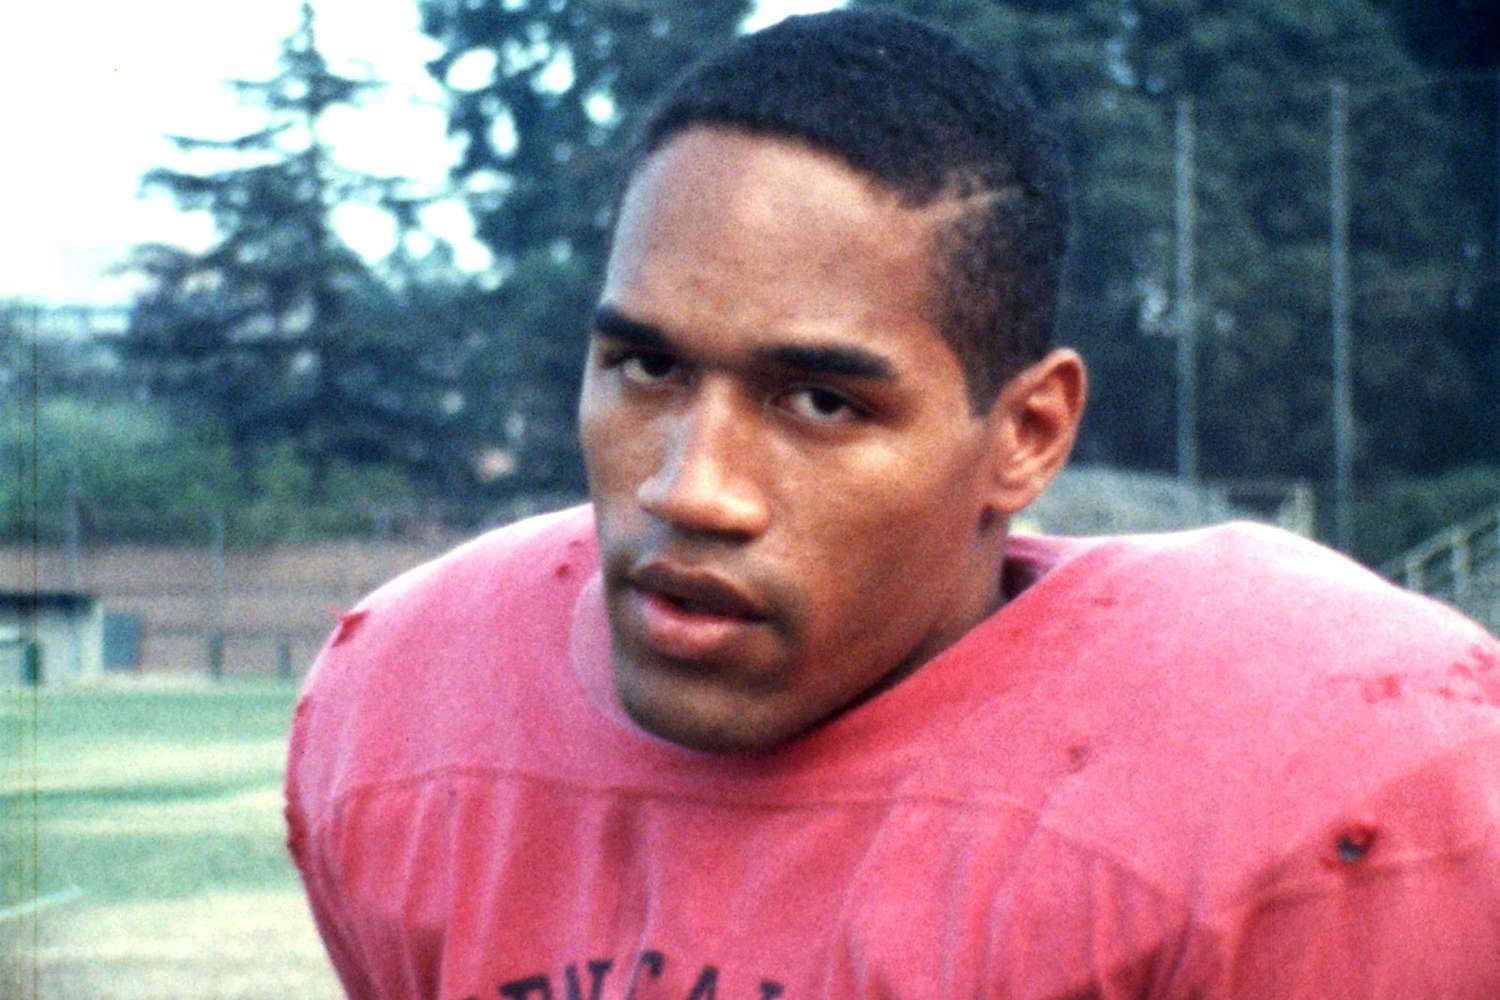 O.J. MADE IN AMERICA STILLS AND IMAGES PROVIDED BY ESPN